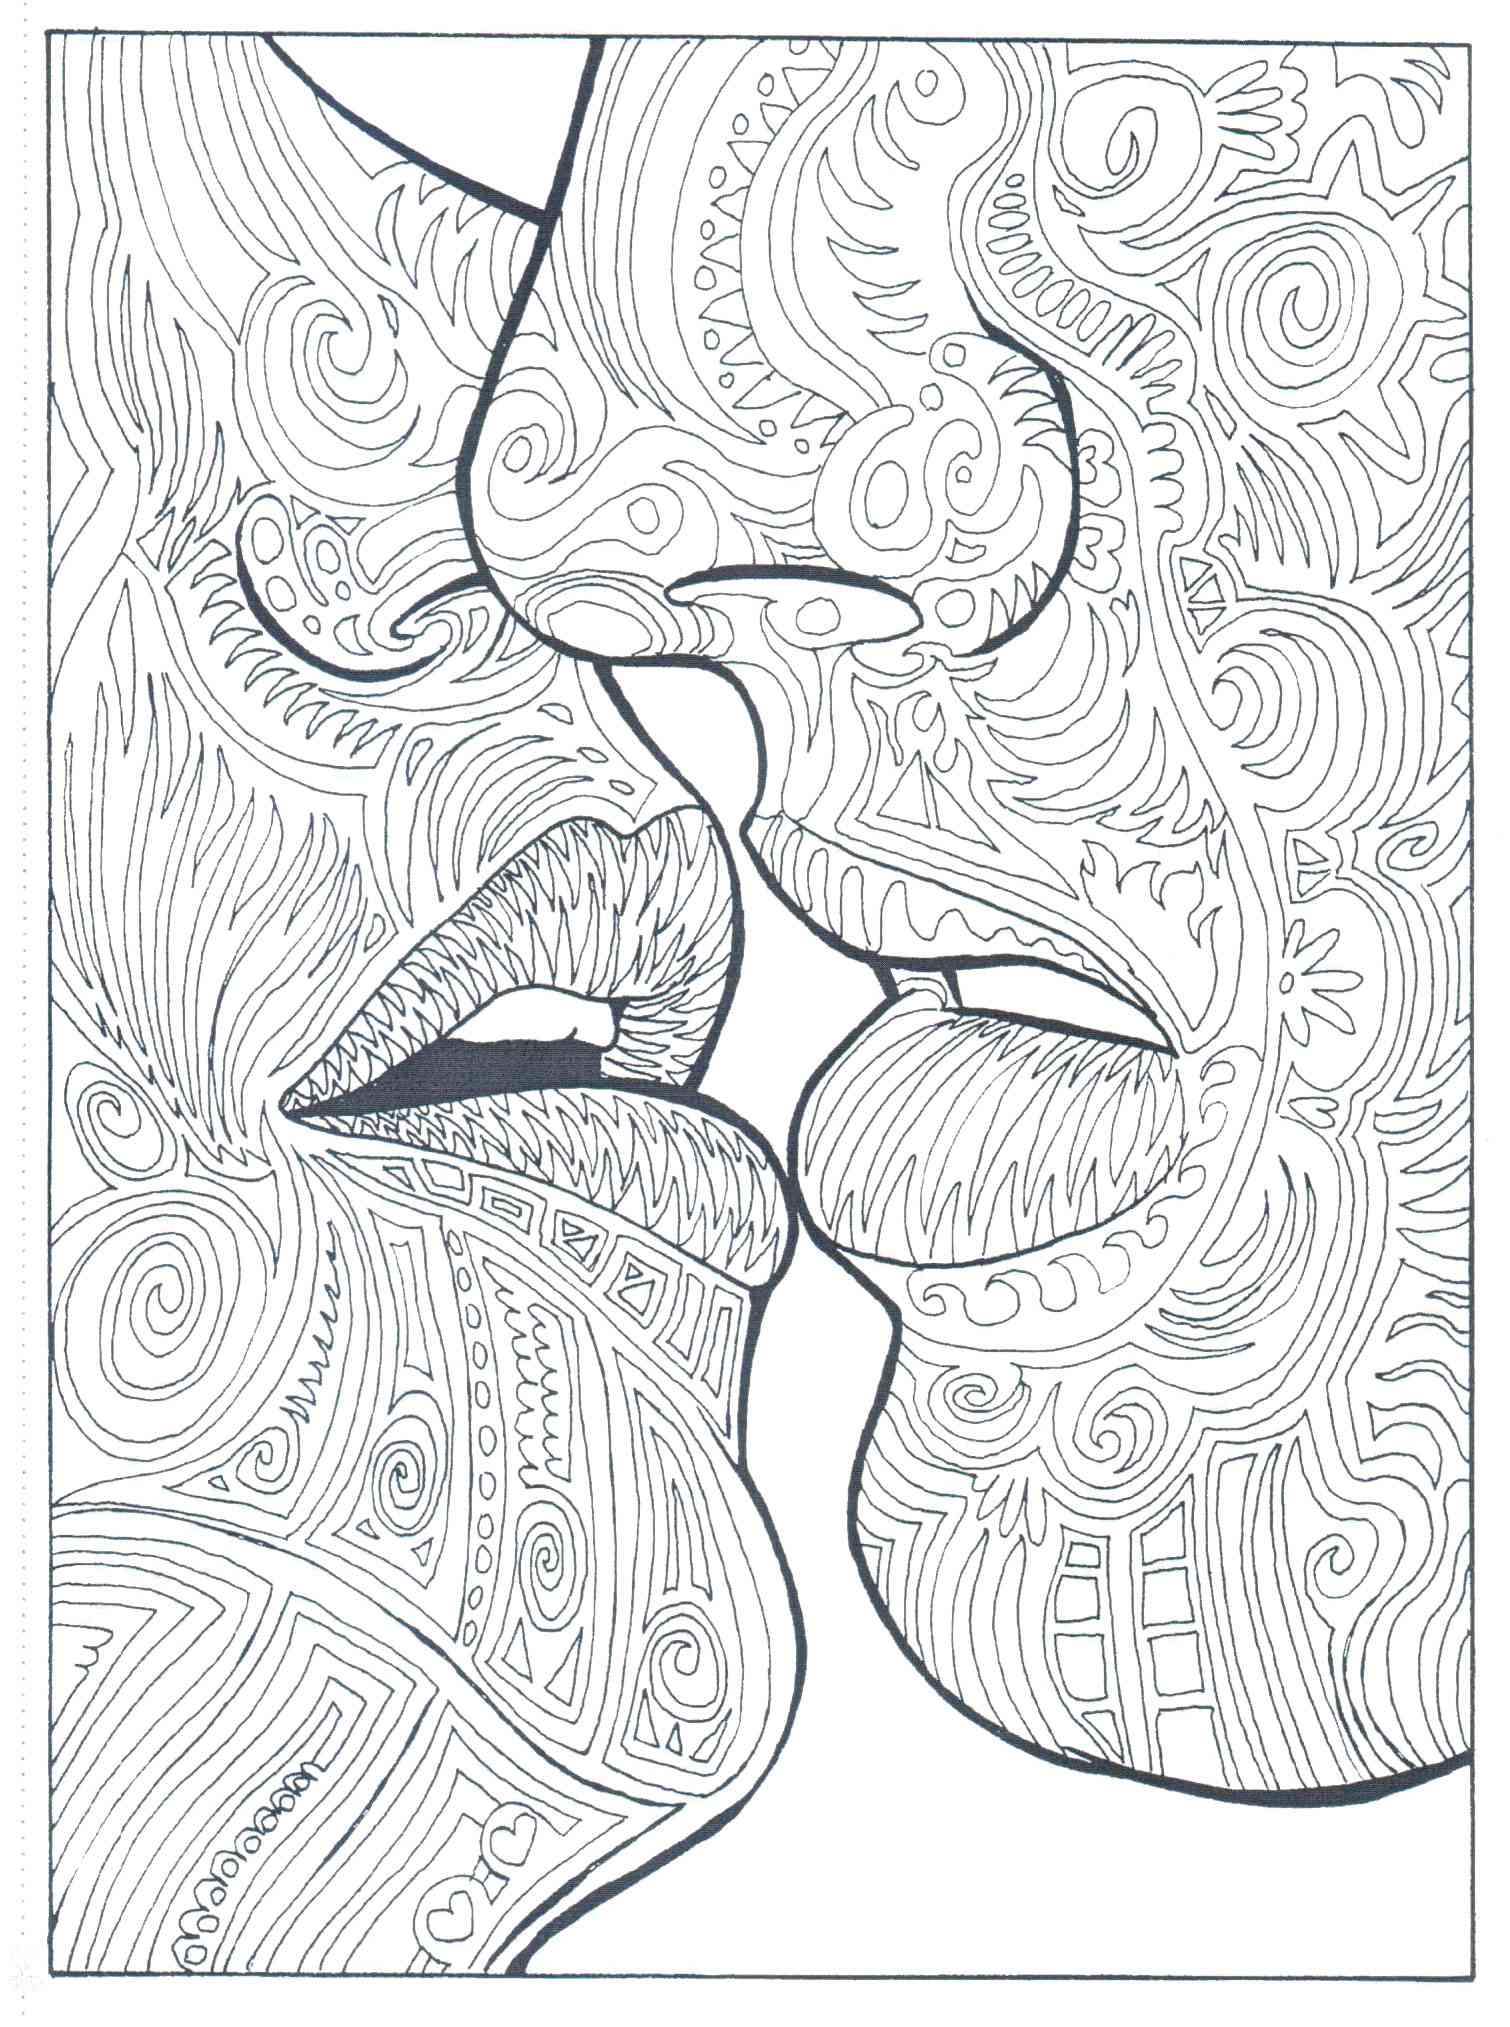 Lips coloring pages for adults